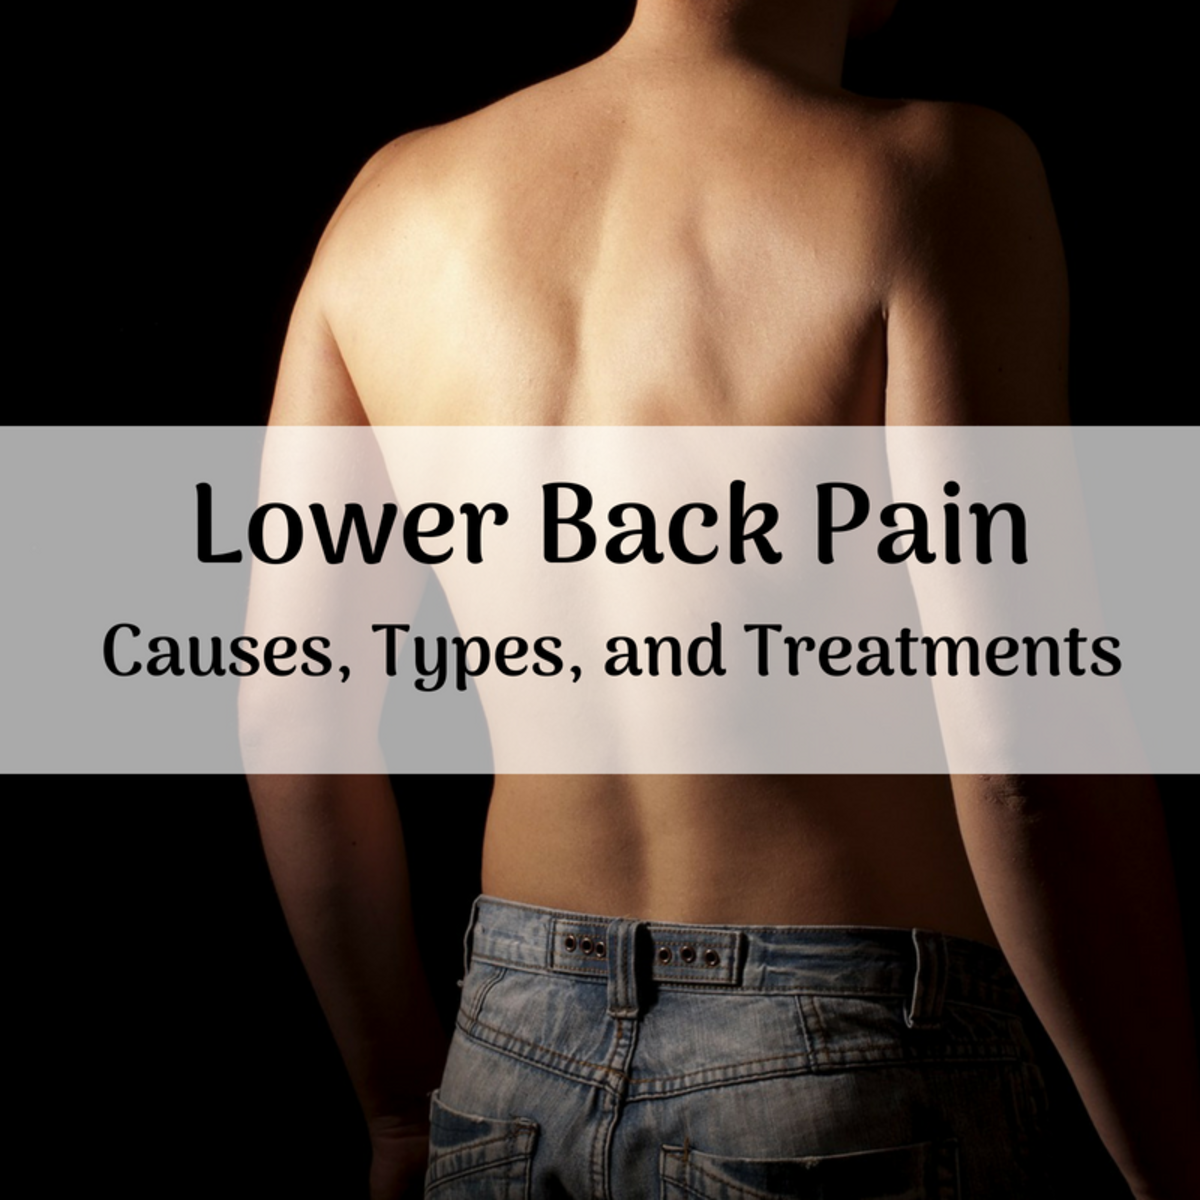 Lower Back Pain Types, Causes, and Treatments ...